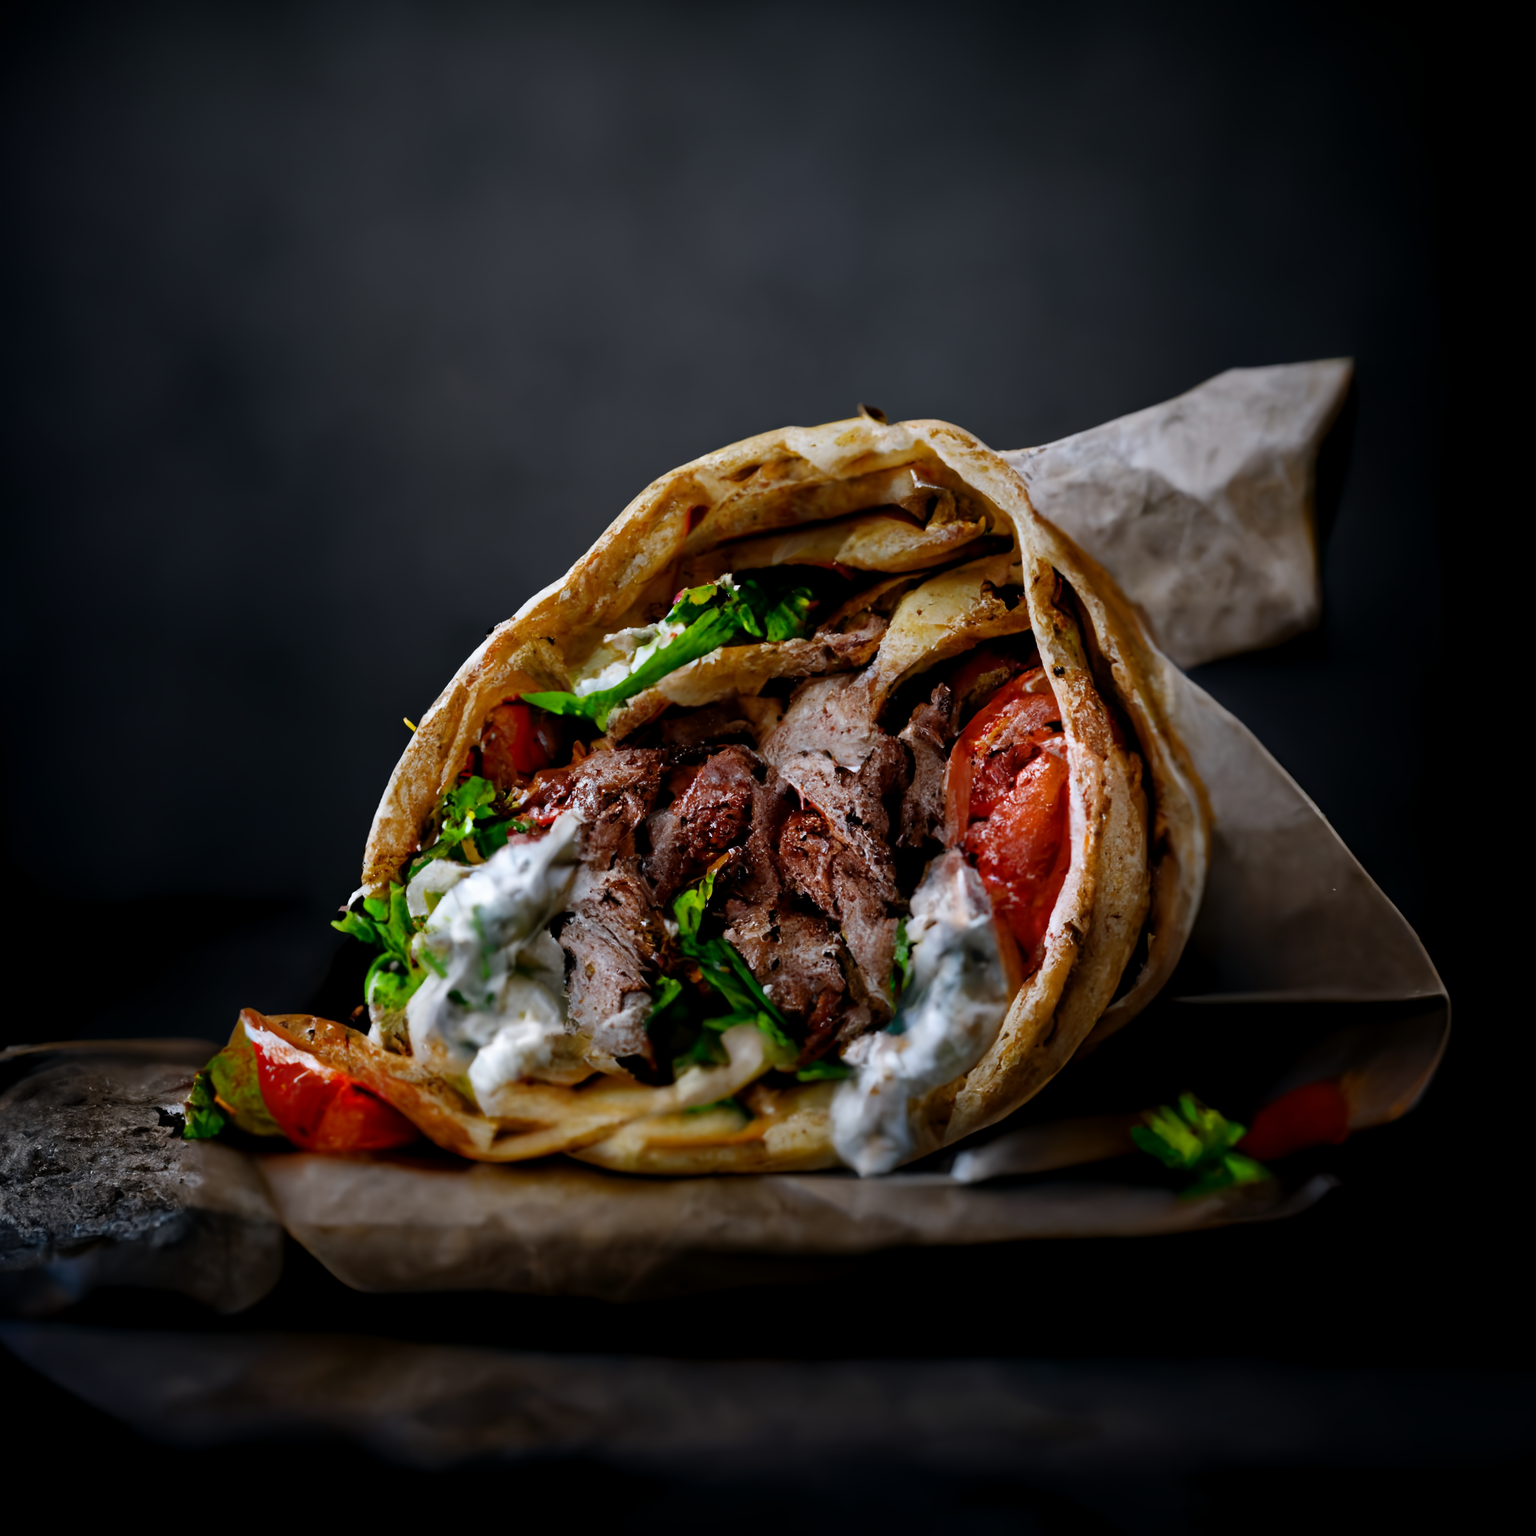 A Greek street food consisting of meat cooked on a vertical rotisserie, served in a pita with vegetables and tzatziki sauce